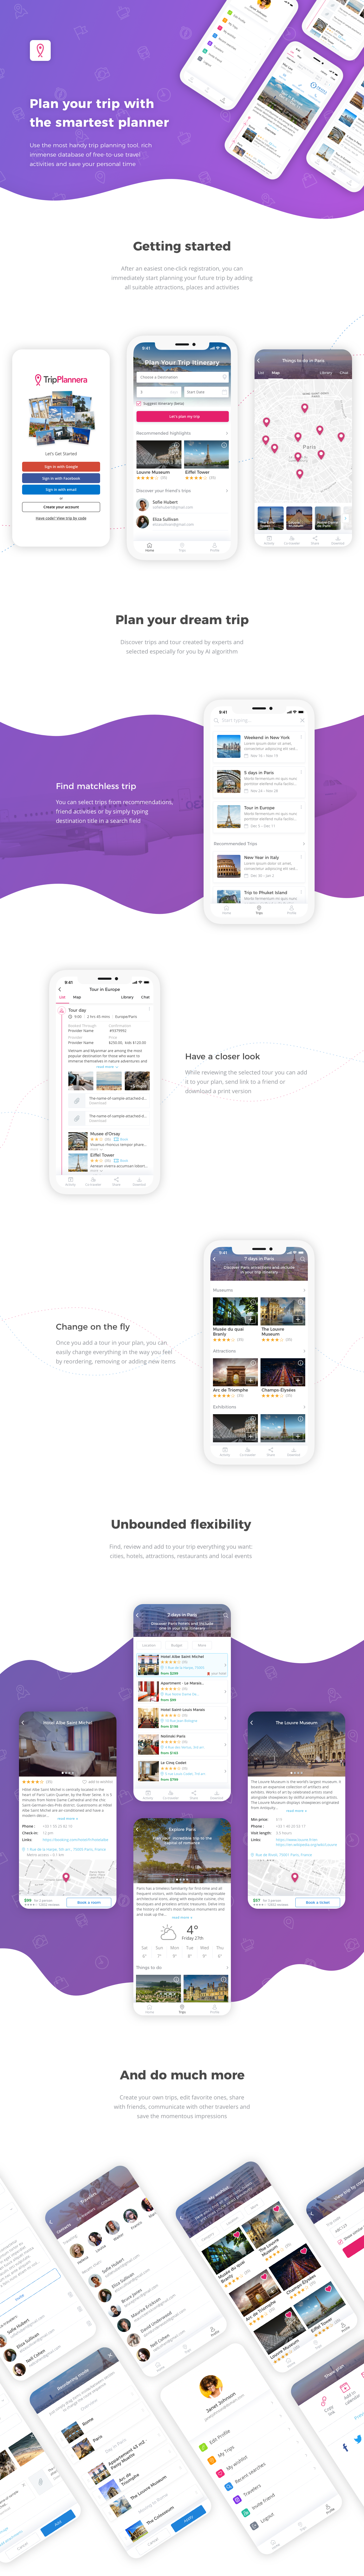 app design UI ux mobile Travel trip Usability user experience user interface application